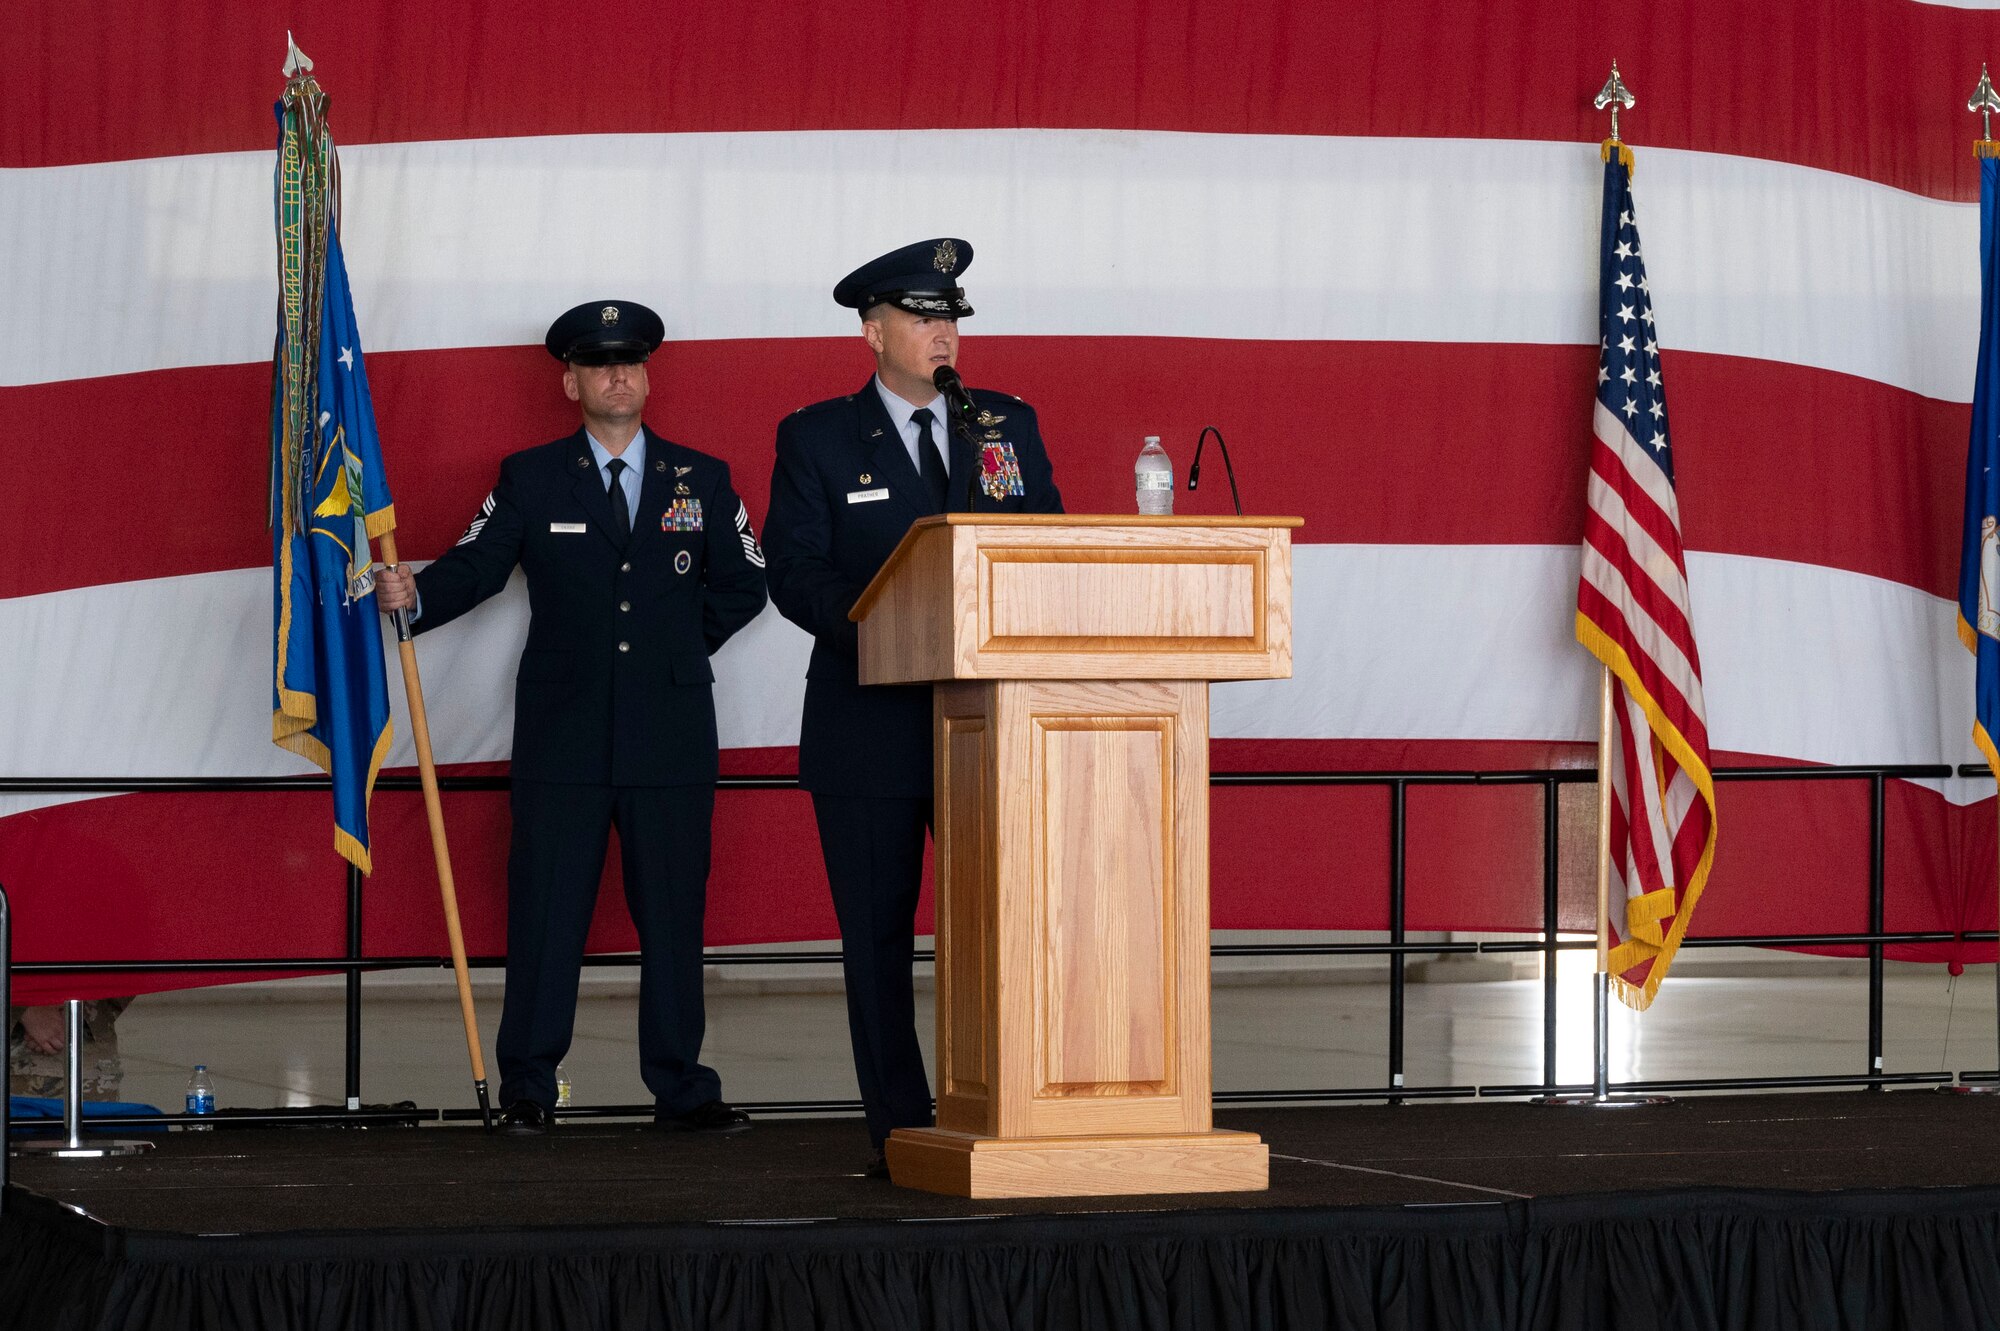 U.S. Air Force Col. Craig Prather, former 47th Flying Training Wing commander, gives a speech during the 47th Flying Training Wing change of command ceremony at Laughlin Air Force Base, Texas, July 22, 2022. As commander, Davidson will oversee nearly 2,800 military and civilian personnel engaged in executing more than 61,000 aircraft sorties yearly in support of Laughlin's Specialized Undergraduate Pilot Training mission. (U.S. Air Force photo by Airman 1st Class Kailee Reynolds)